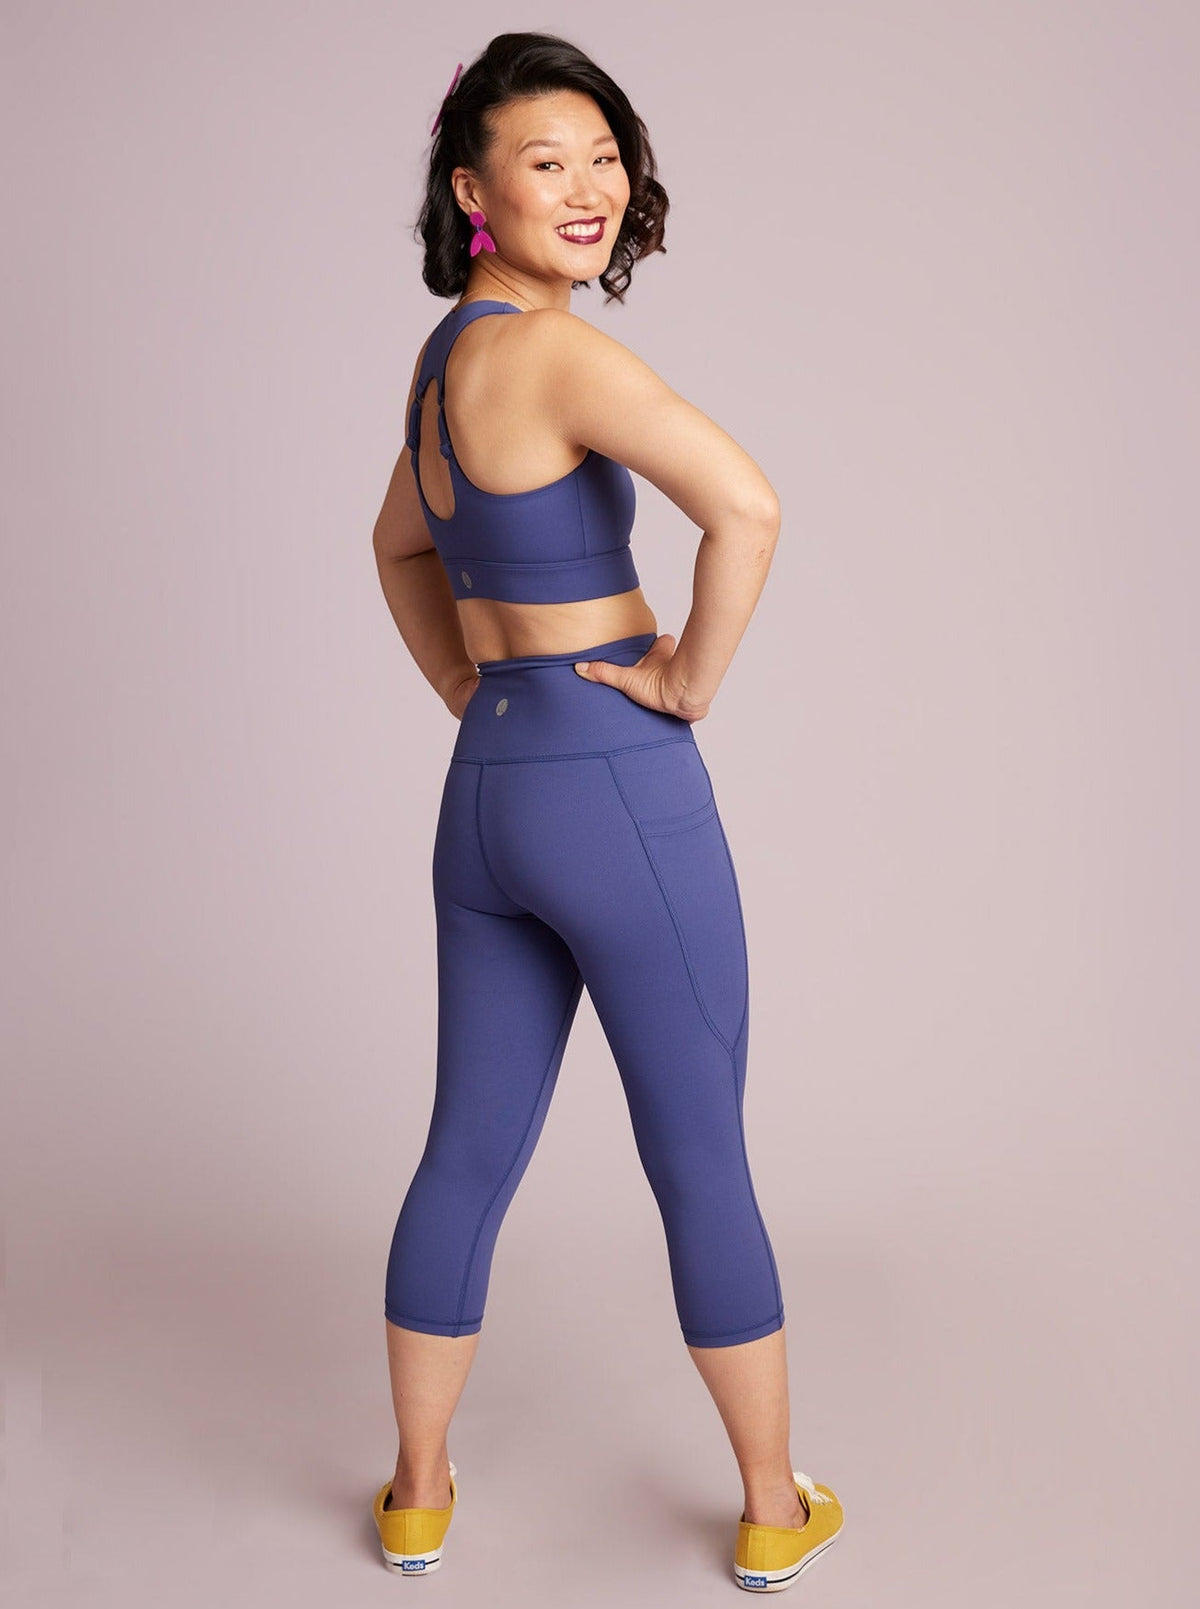 Indigo Blue Everyday Cropped Legging - 3/4 length - squat proof activewear made from recycled plastic bottles